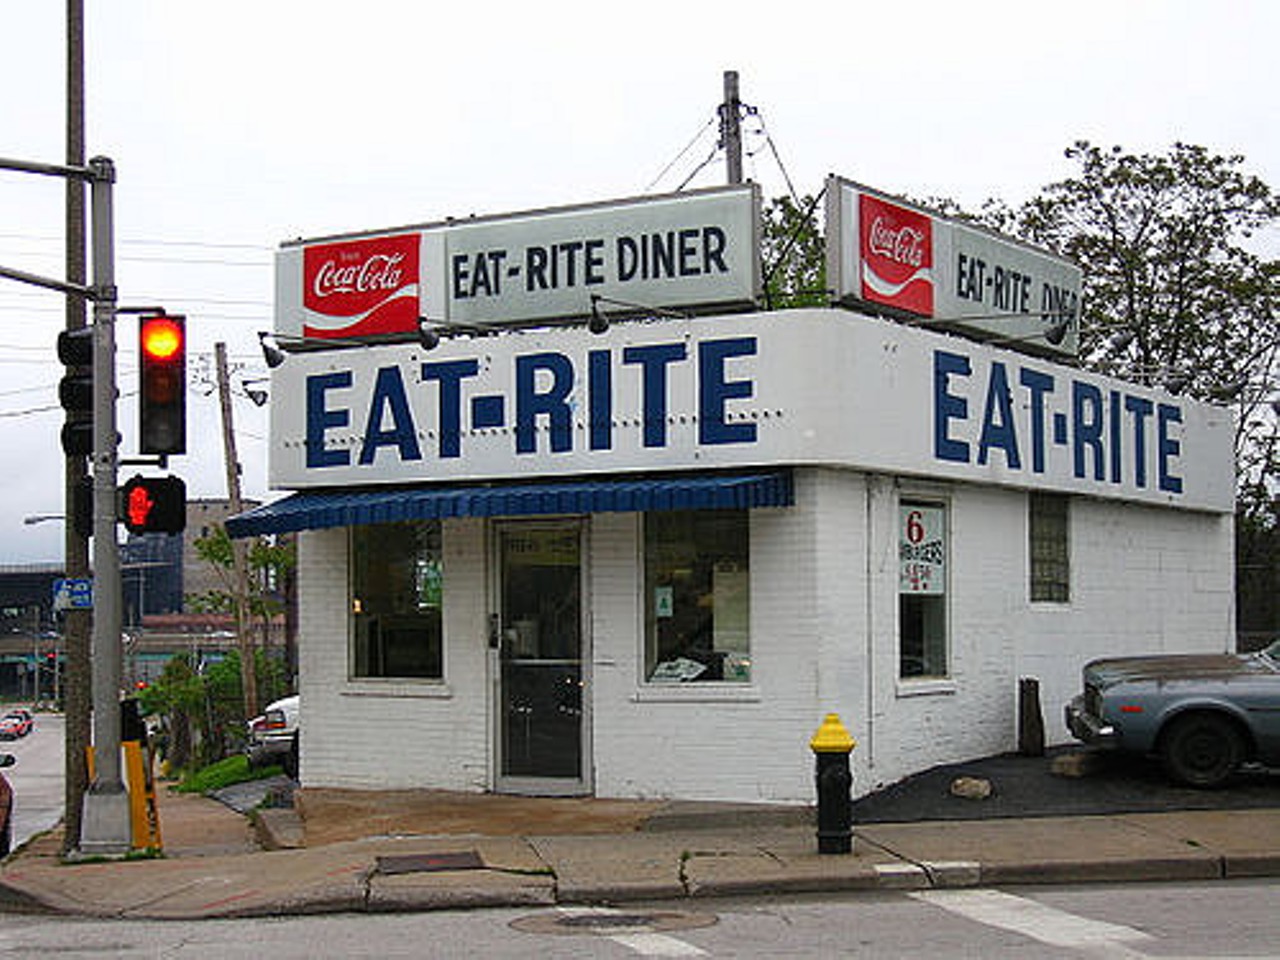 Eat your fourth meal at Eat-Rite Diner.
Taco Bell is for old married dads in Ellisville.
Photo courtesy of Flickr / Runs With Scissors.